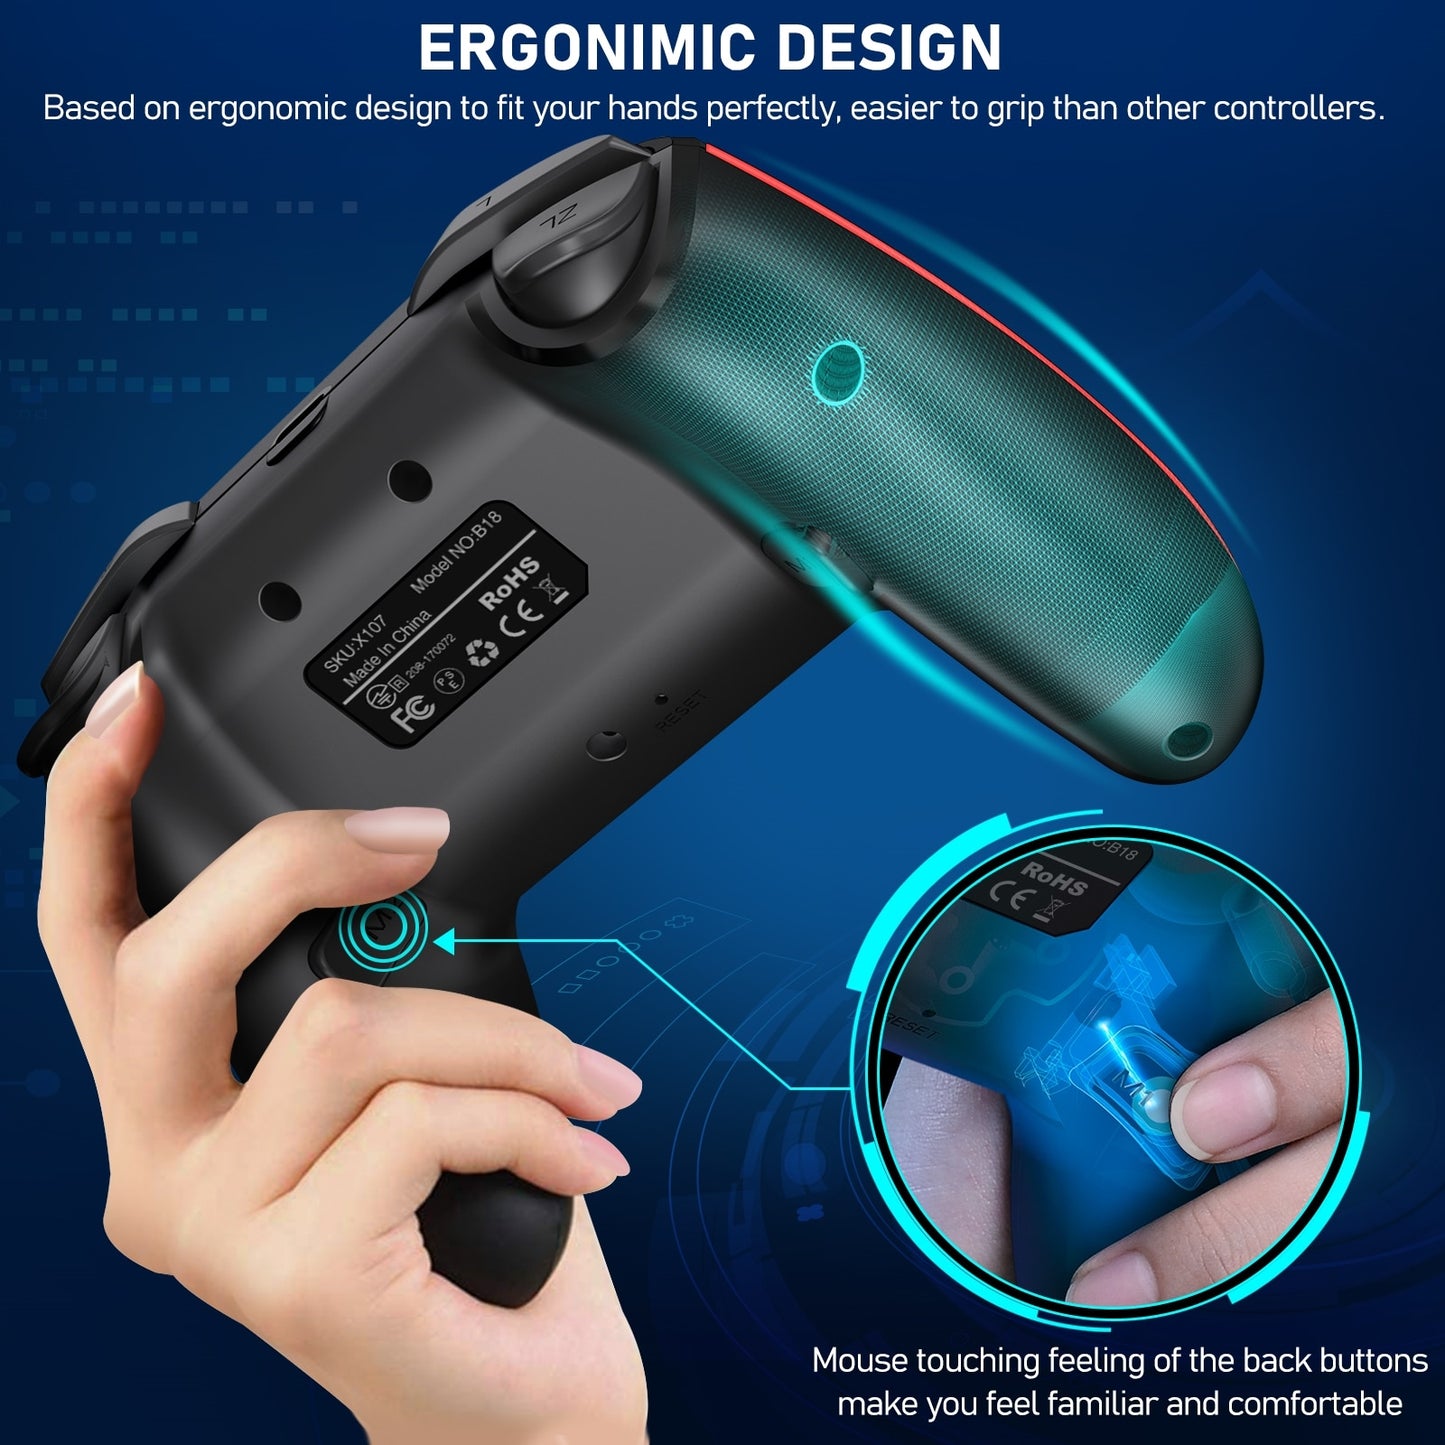 Wireless Controller for Nintendo Switch OLED - Pro Gamepad with Turbo